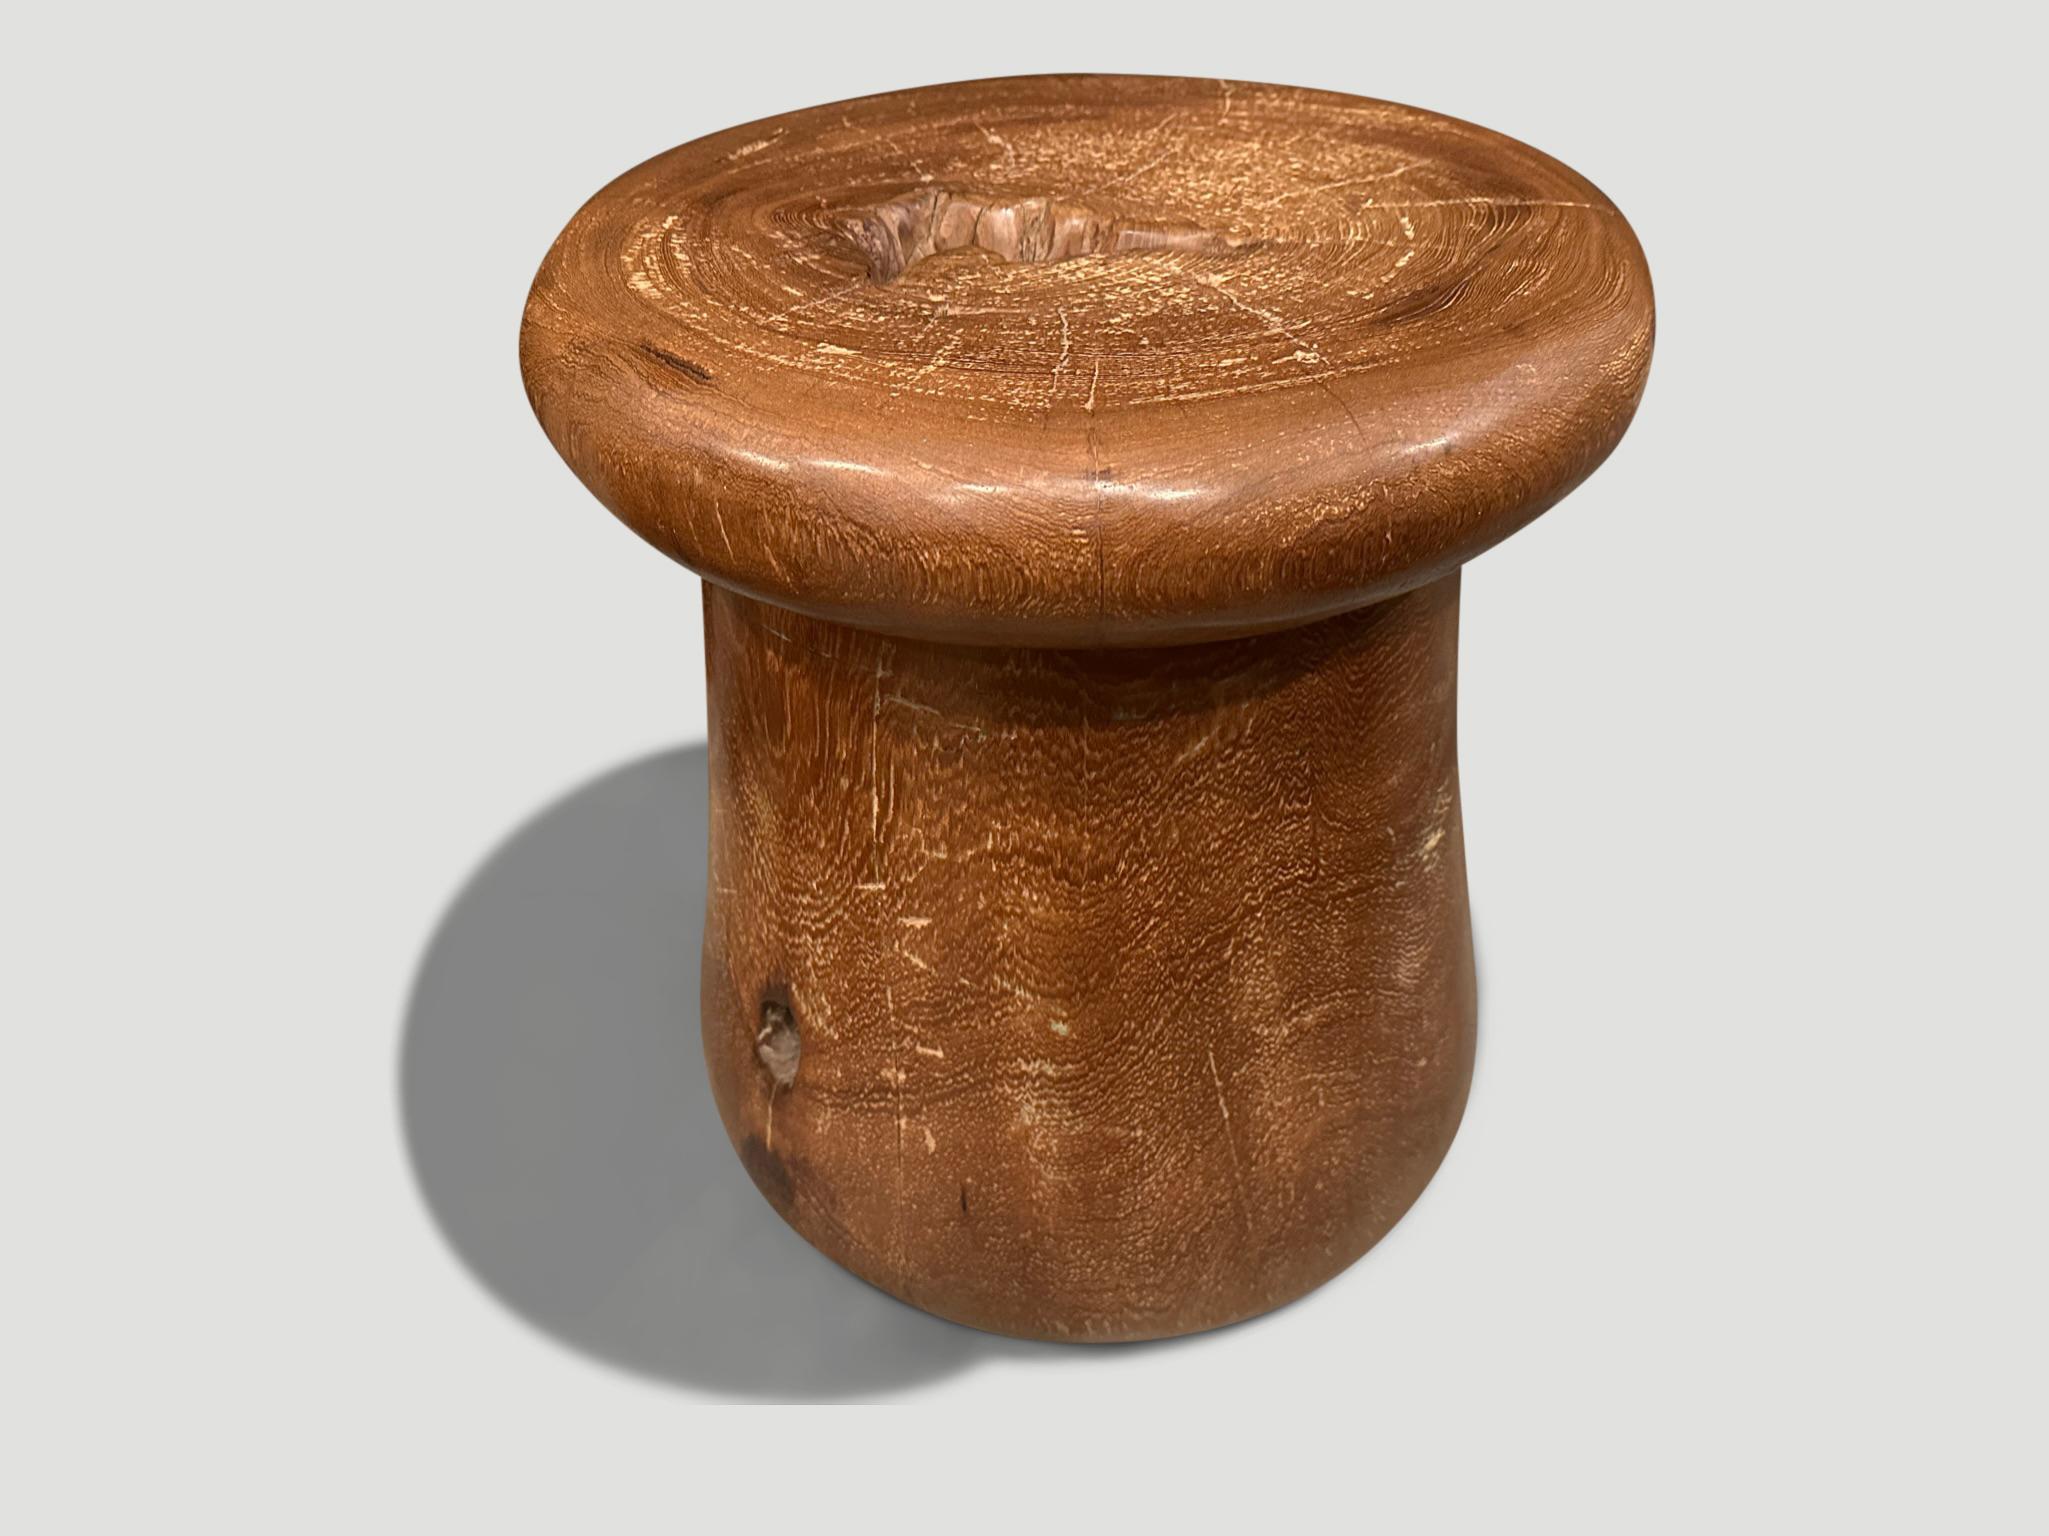 Andrianna Shamaris Century Old Teak Wood Side Table or Stool In Excellent Condition For Sale In New York, NY